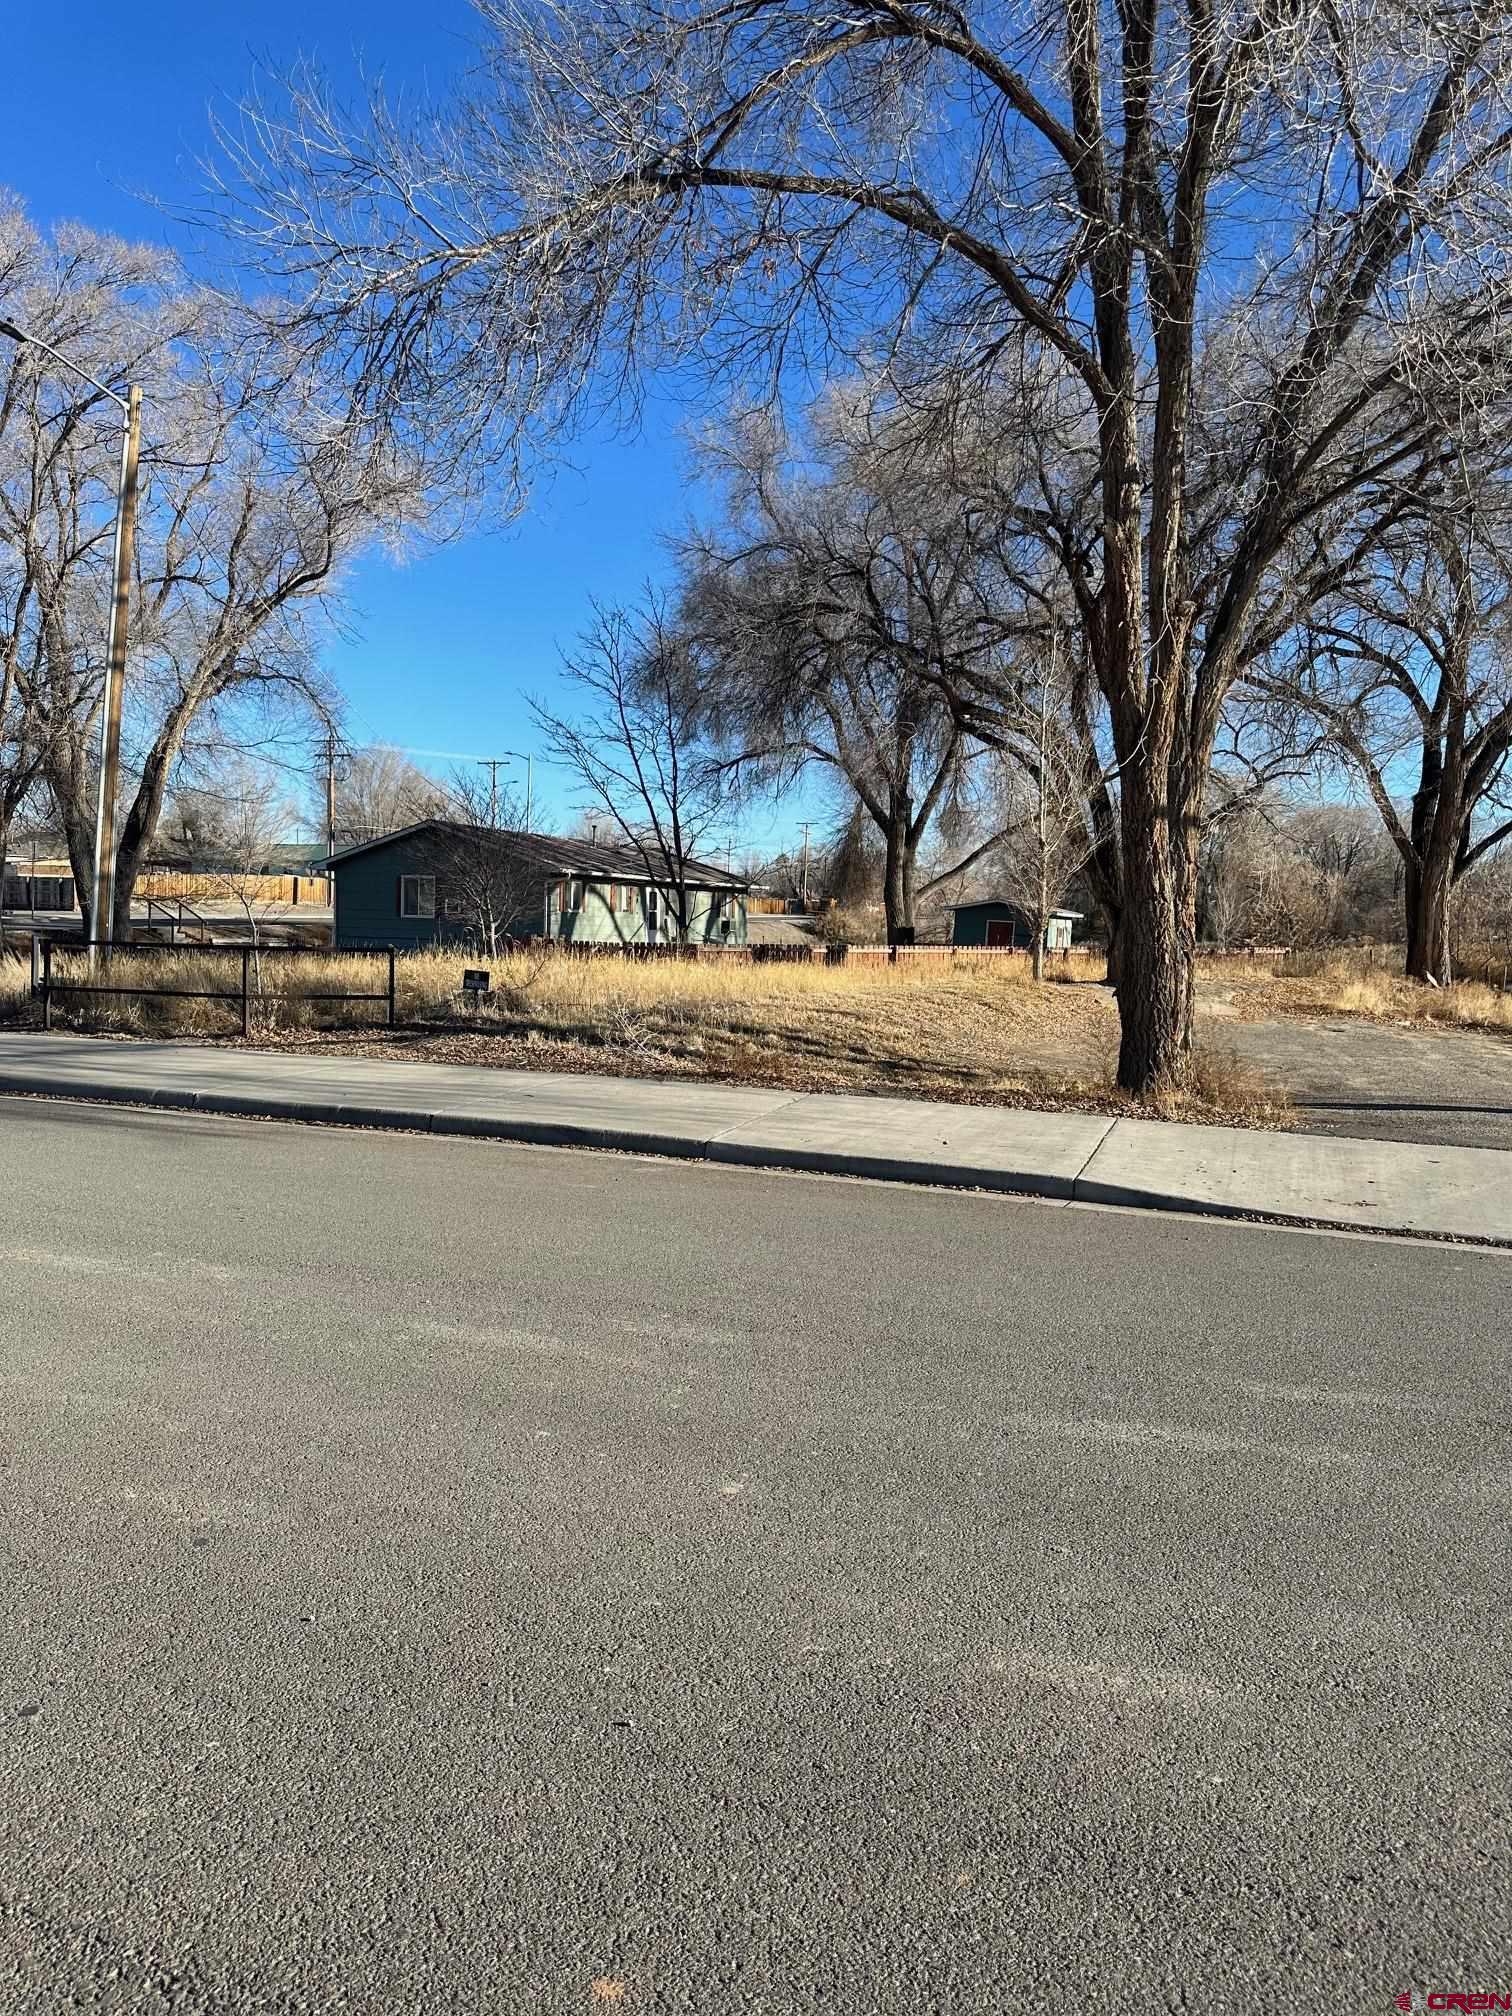 Rare commercial lot adjacent to the Uncompahgre River and bike trail. This lot is offered at a recently appraised land price as if it did not have a home on it. The home is 3/2 rental and has a current tenant with a month to month lease.